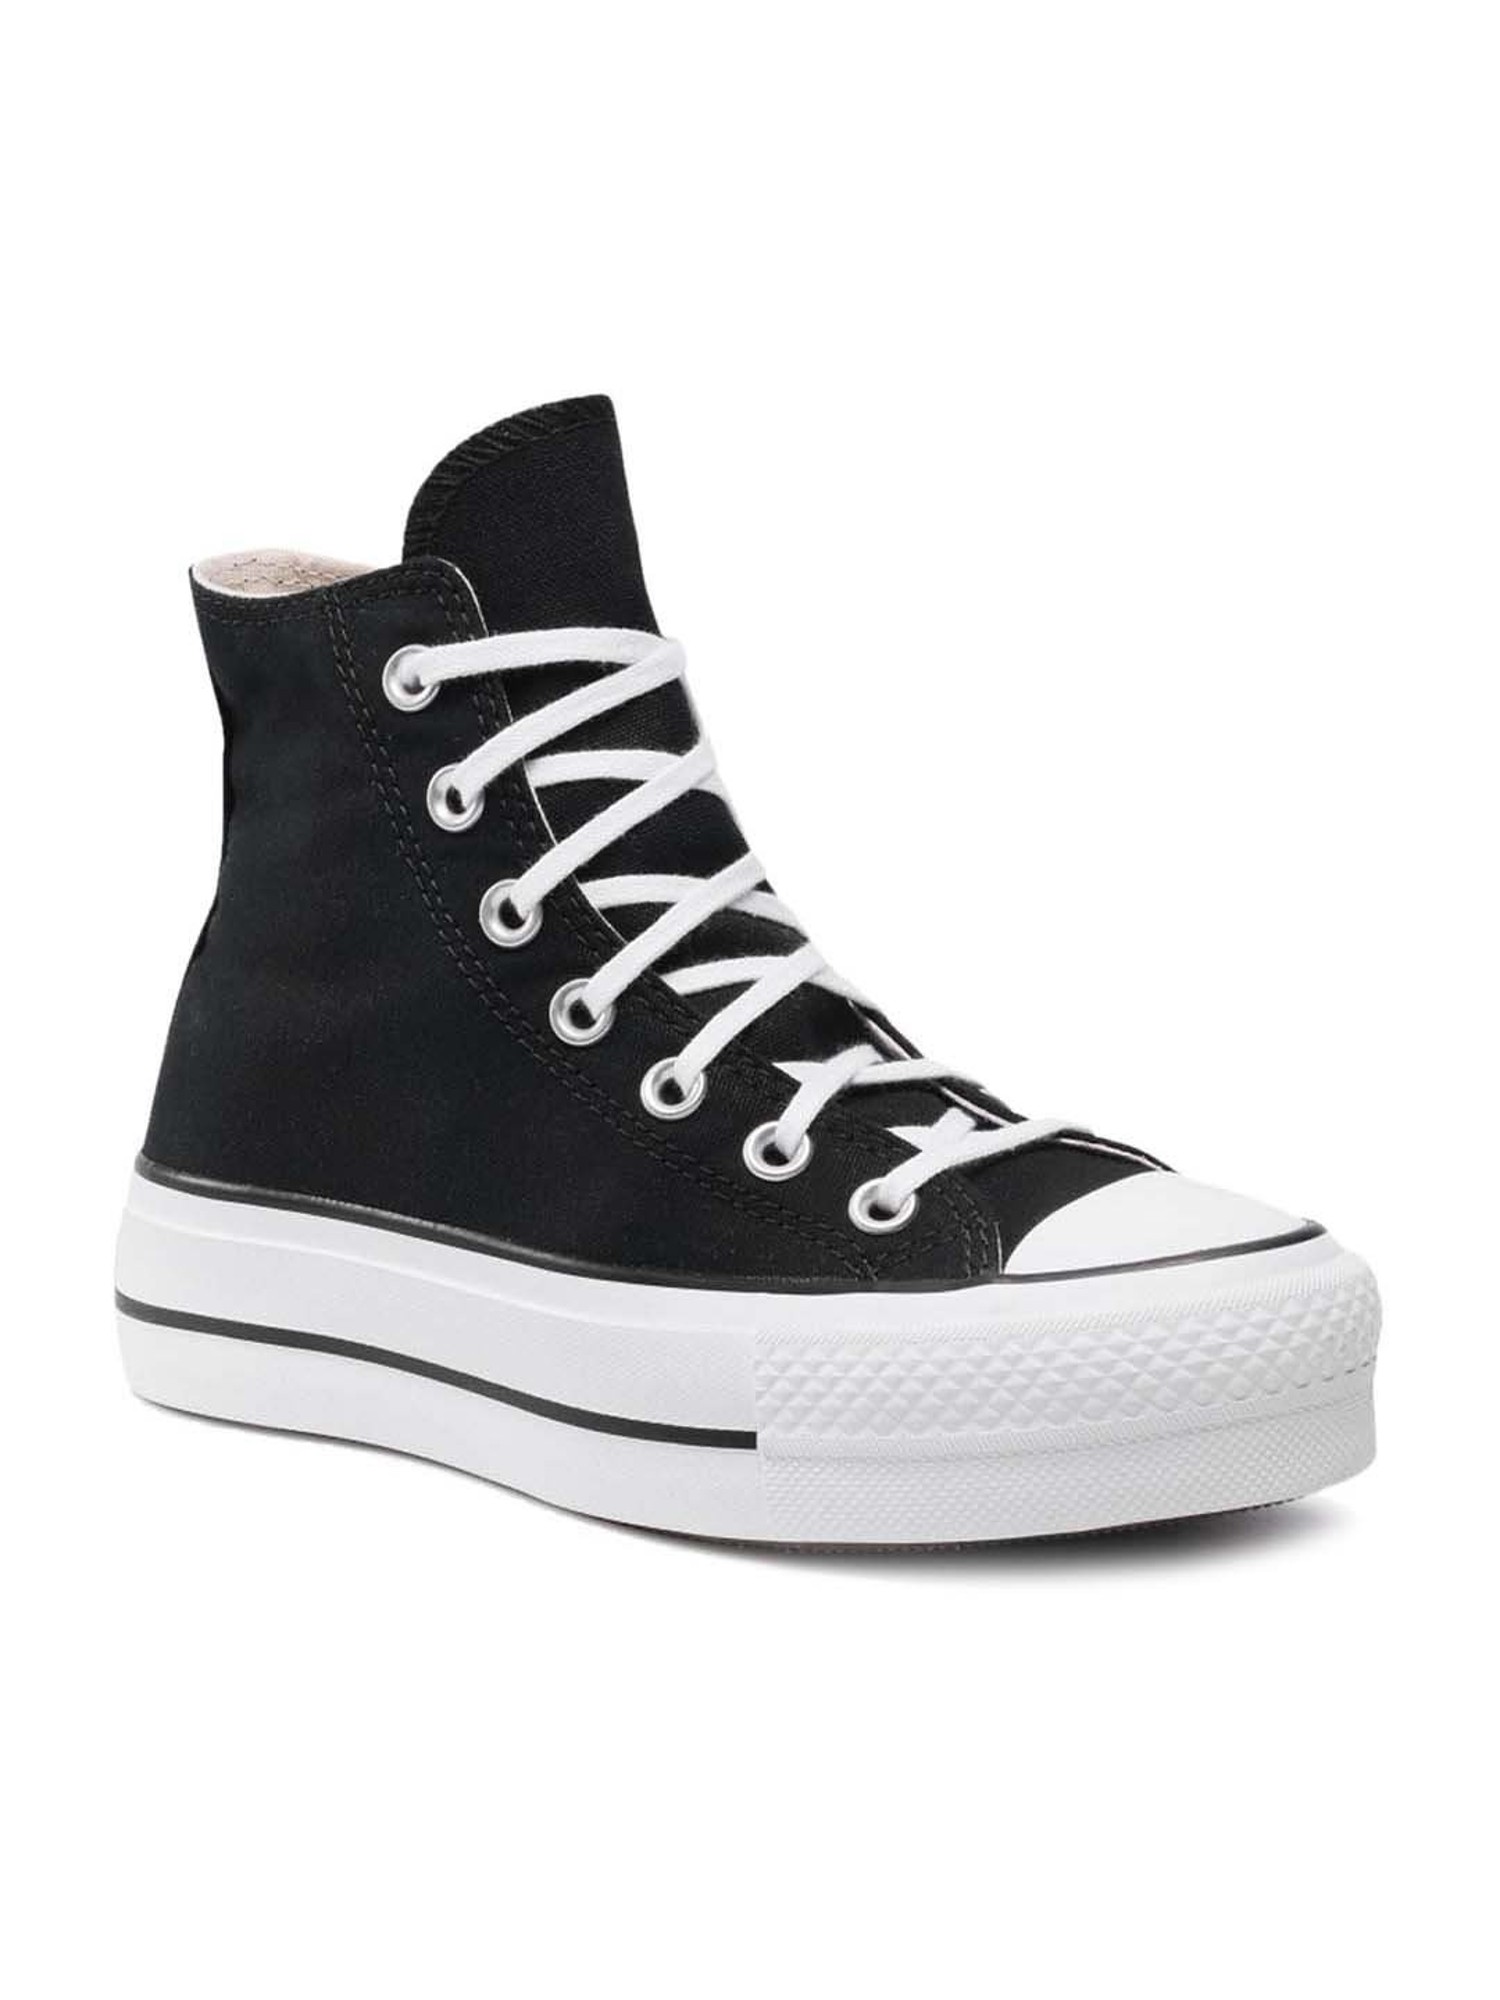 Buy Converse Women's Chuck Taylor All Star Black Sneakers for Women at Best  Price @ Tata CLiQ